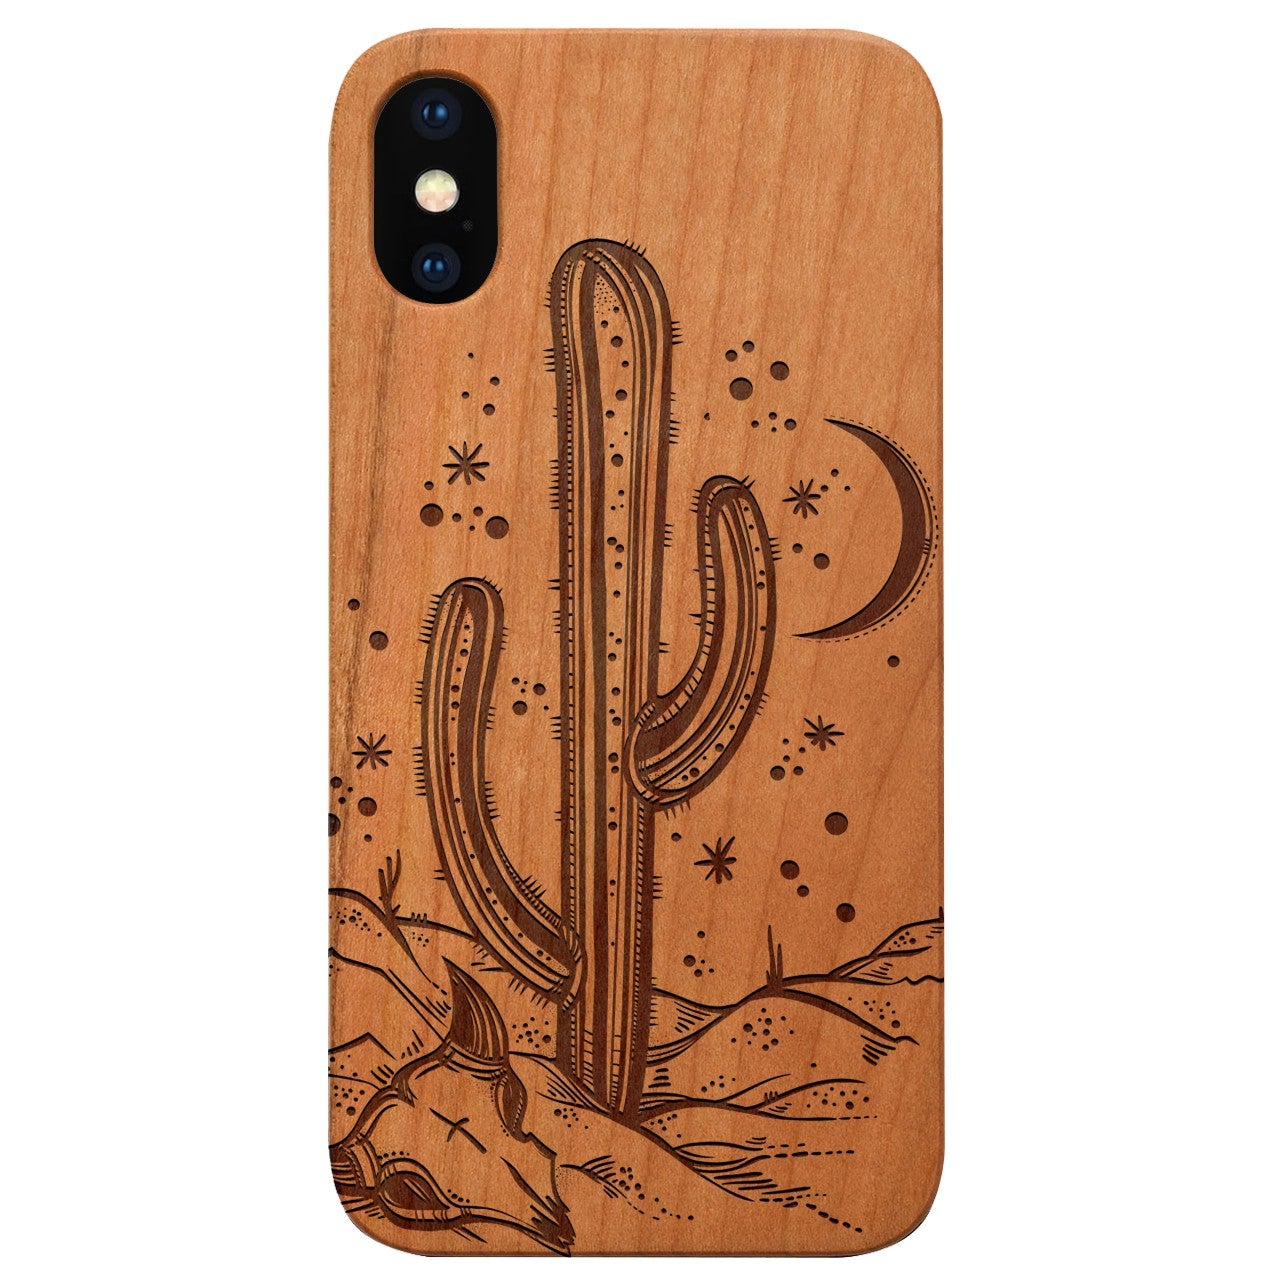  Cactus - Engraved - Wooden Phone Case - IPhone 13 Models